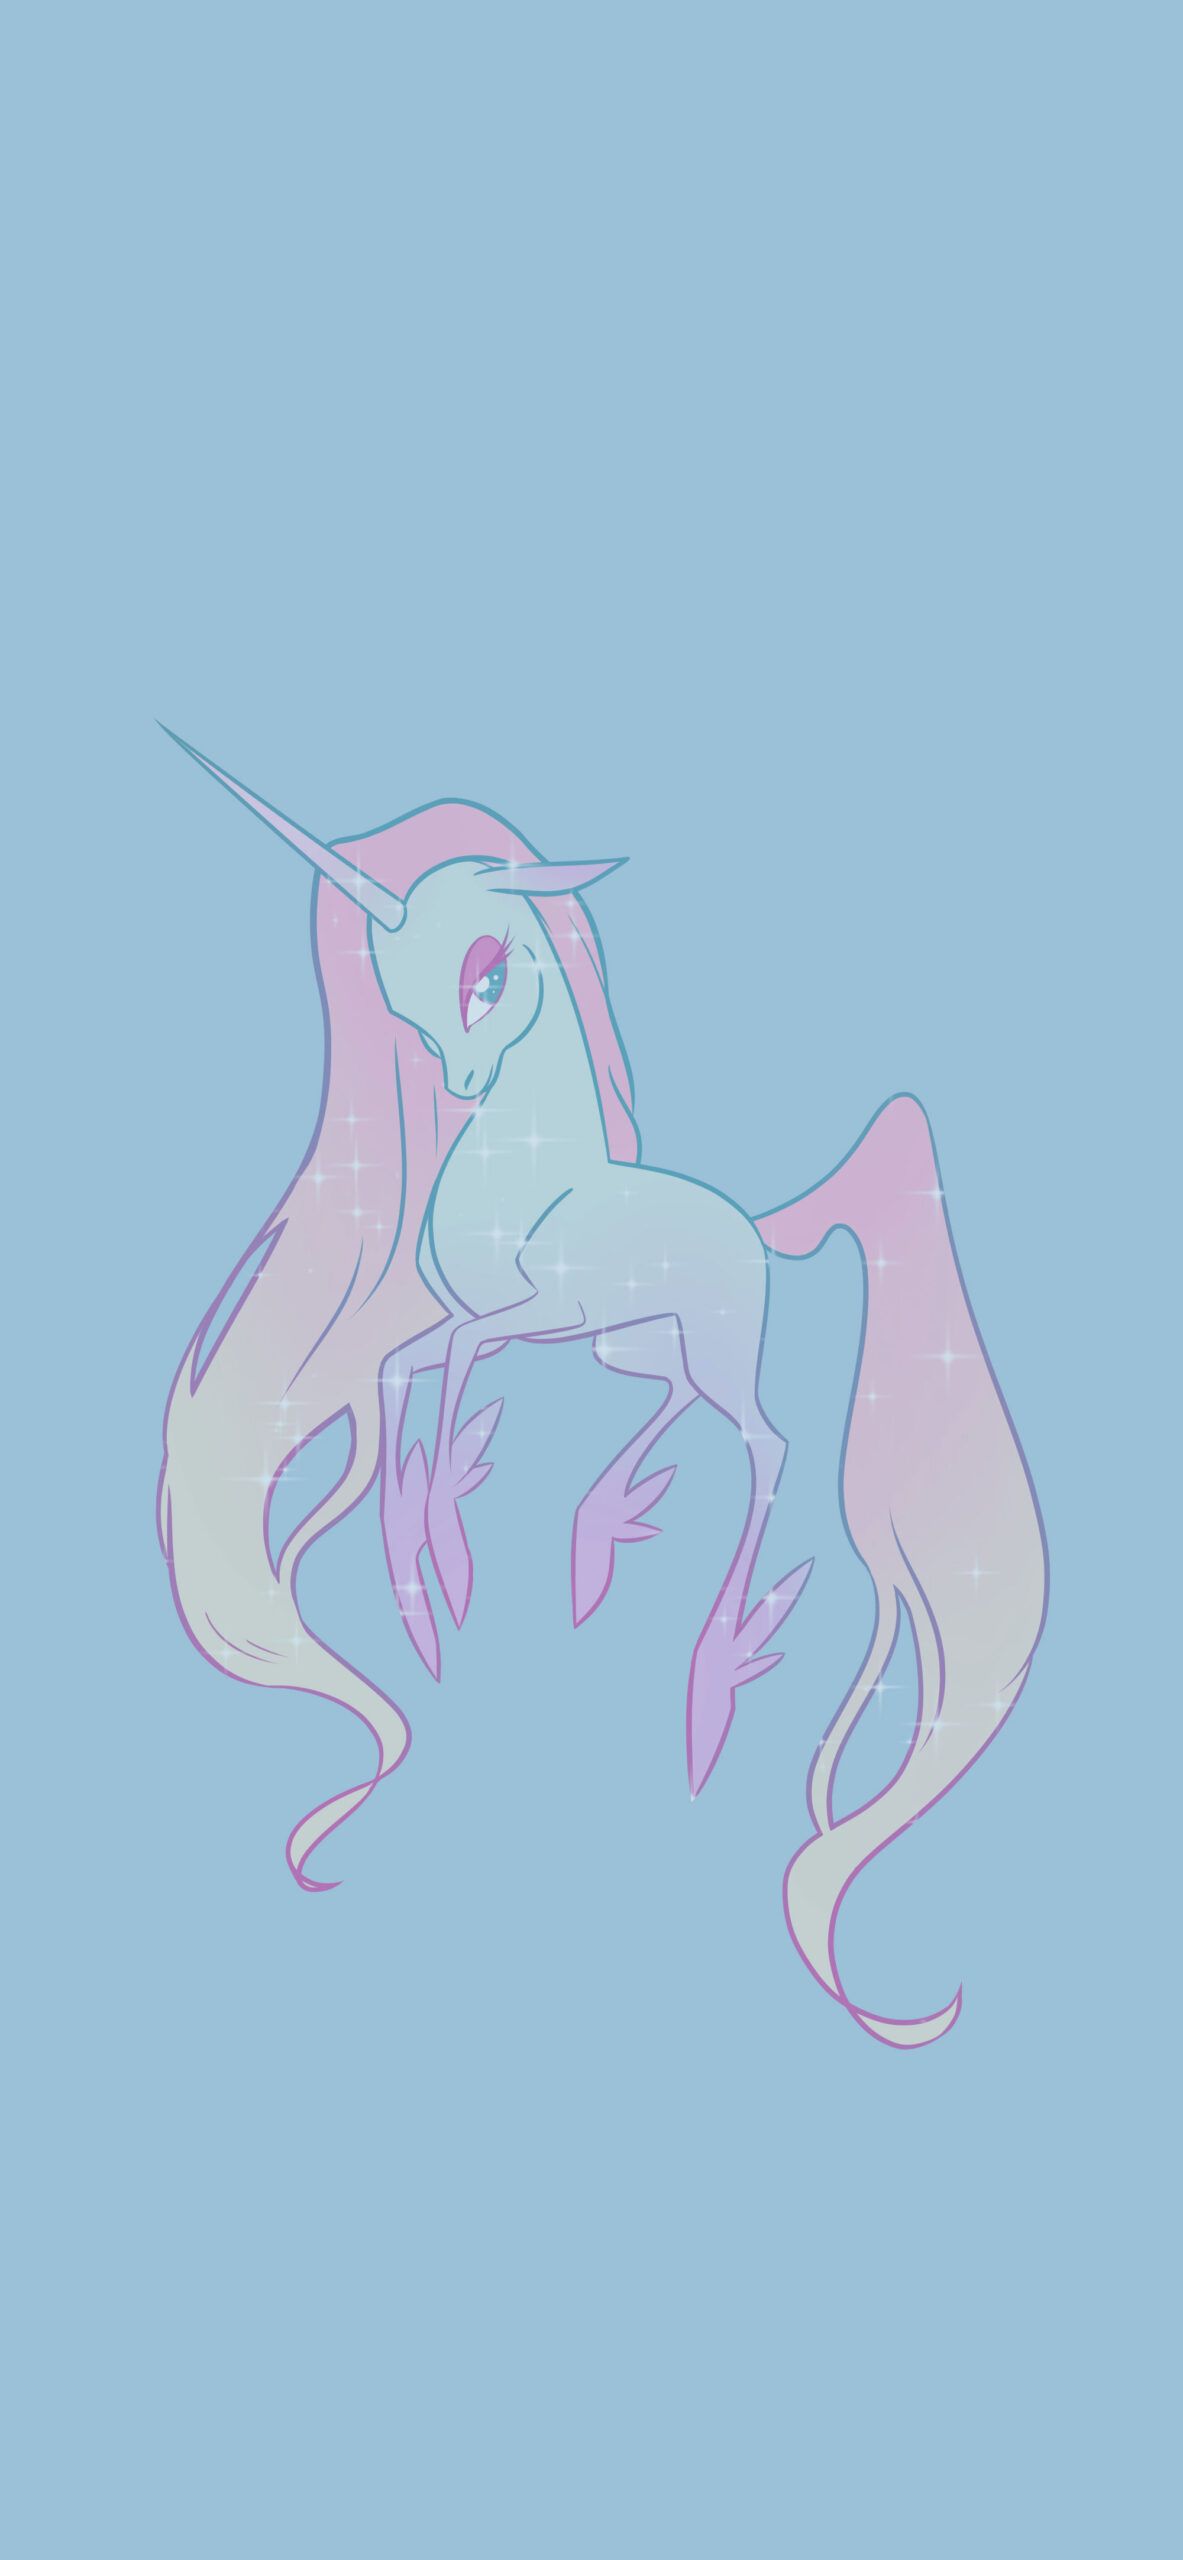 A unicorn with long hair and pink wings - Mermaid, light blue